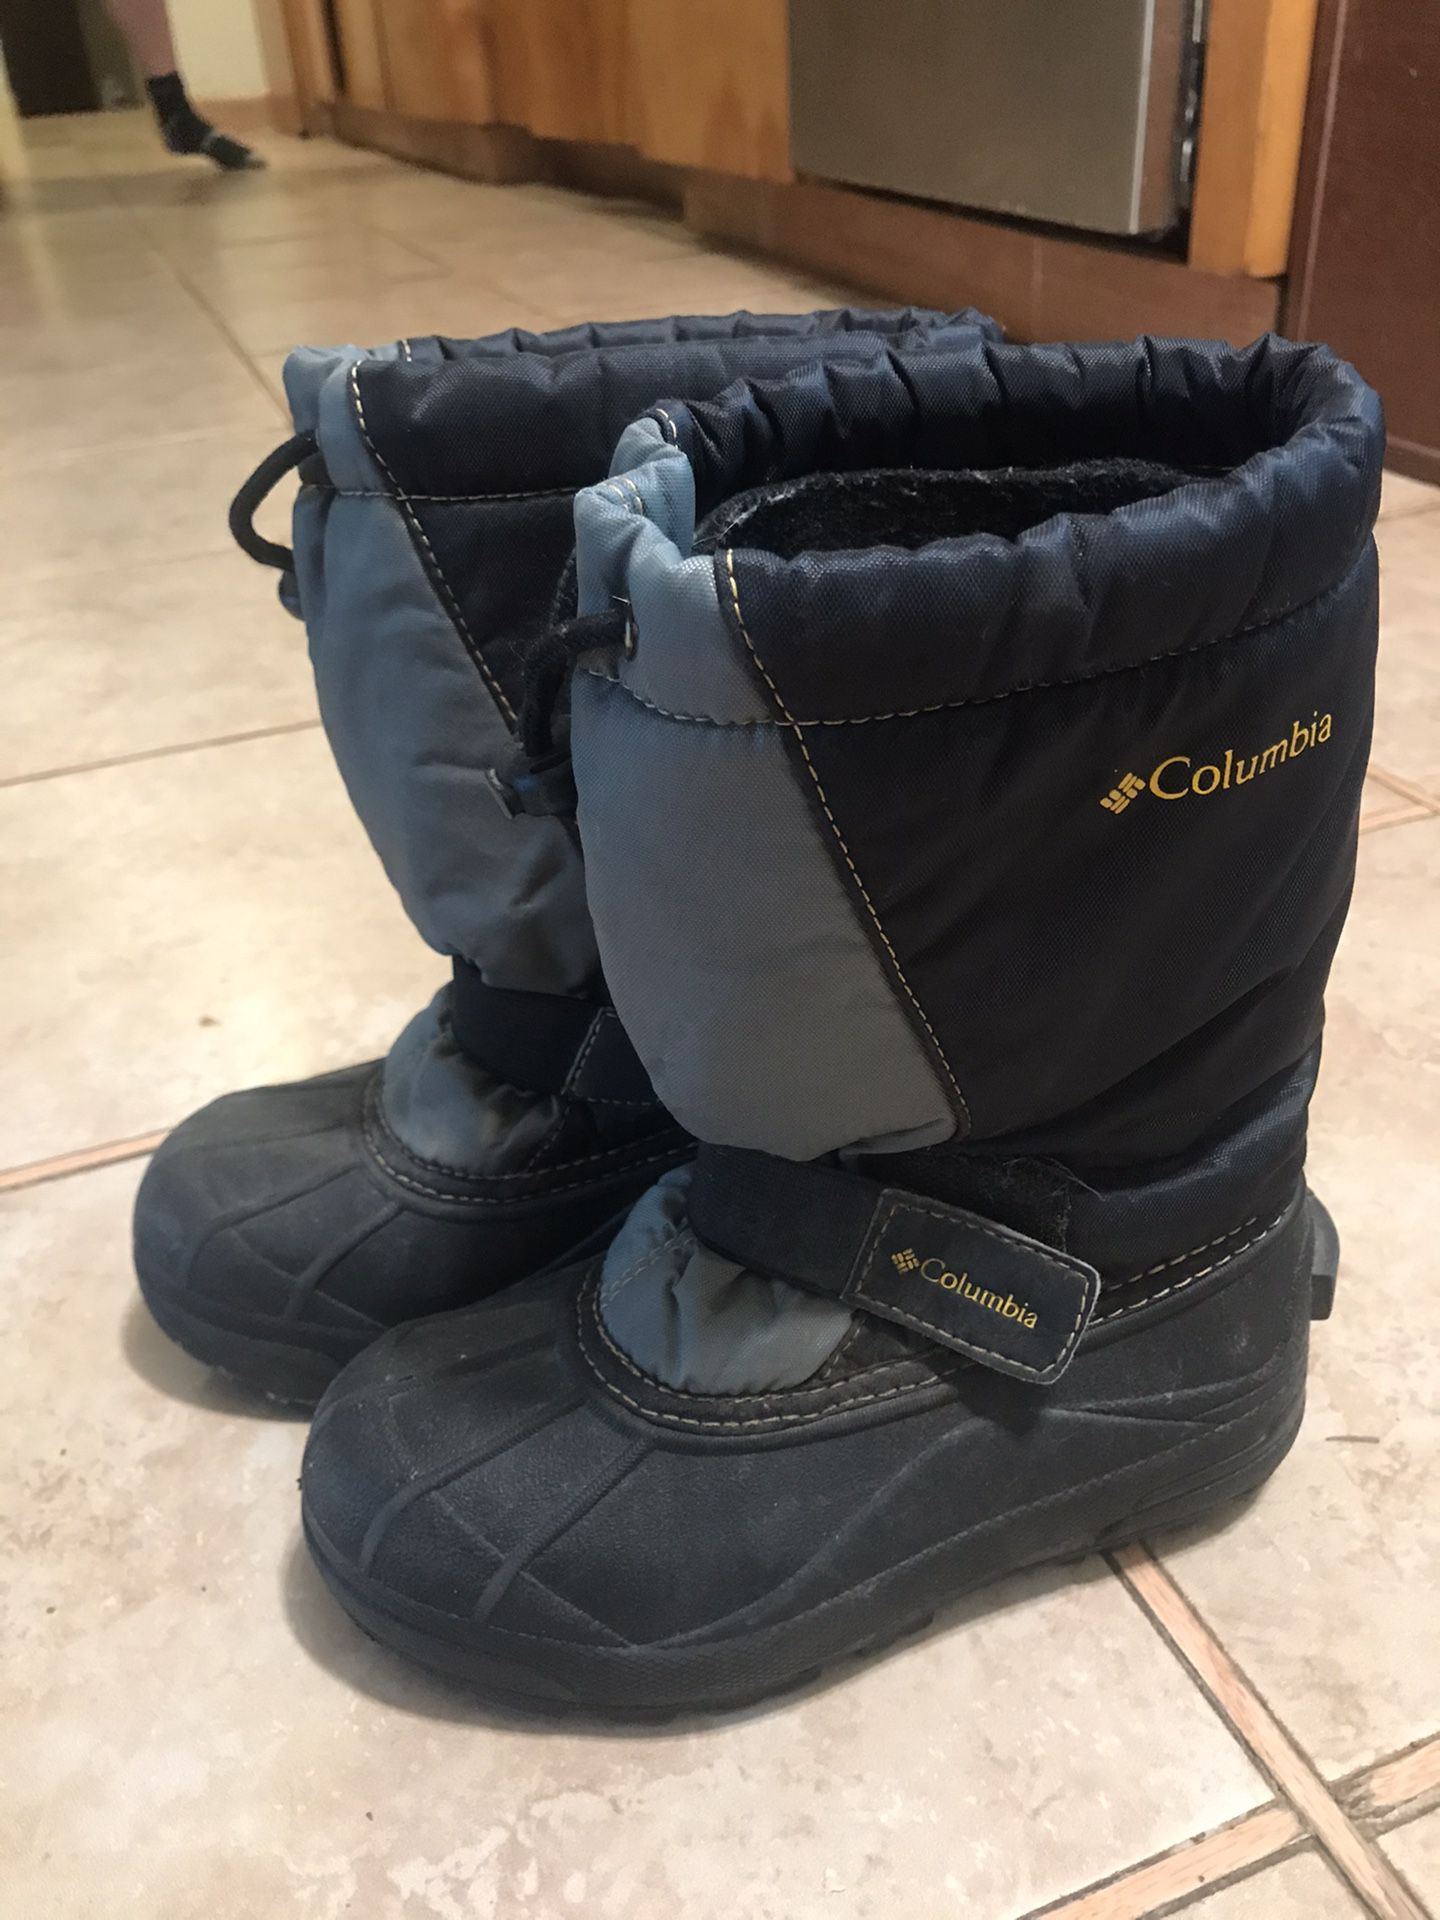 Columbia Snow Boots - kids size 13